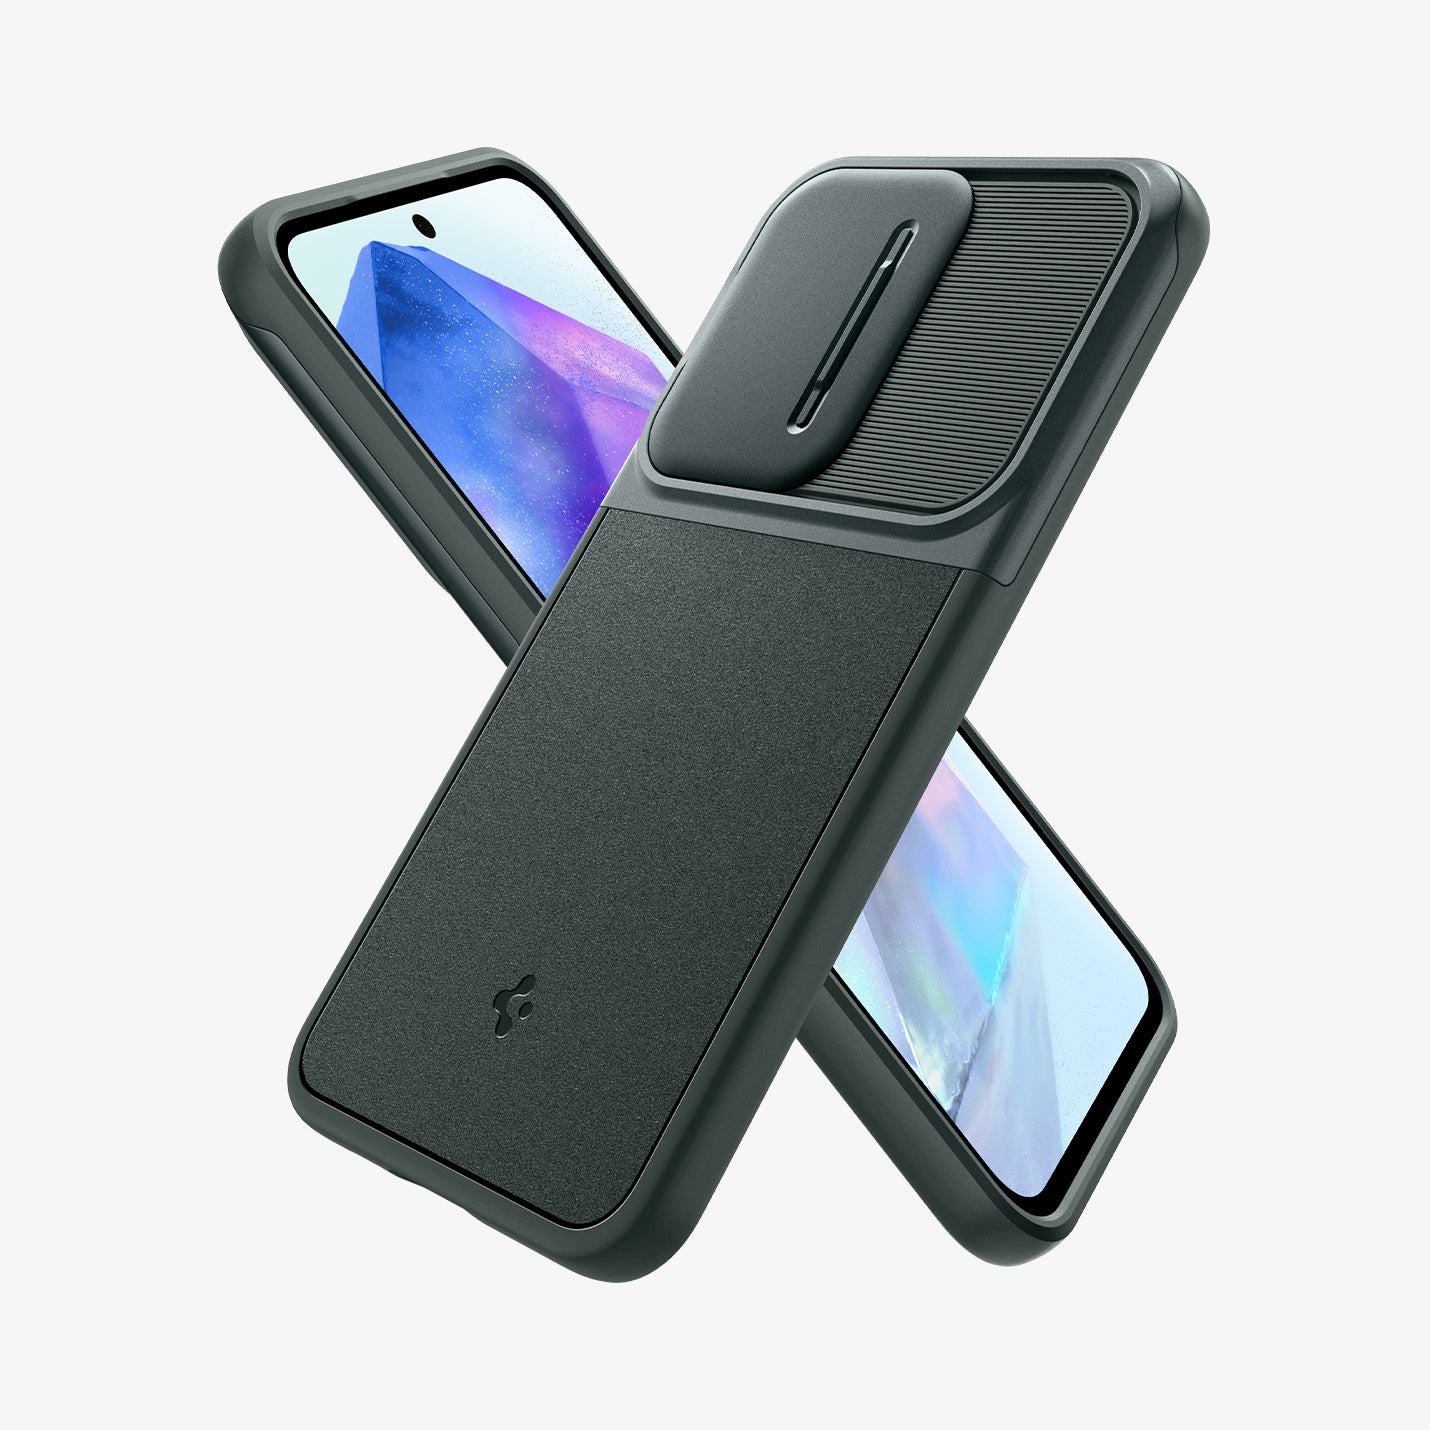 ACS07536 - Galaxy A55 5G Case Optik Armor in Abyss Green showing the back, partial side and behind it, a device showing partial front and side